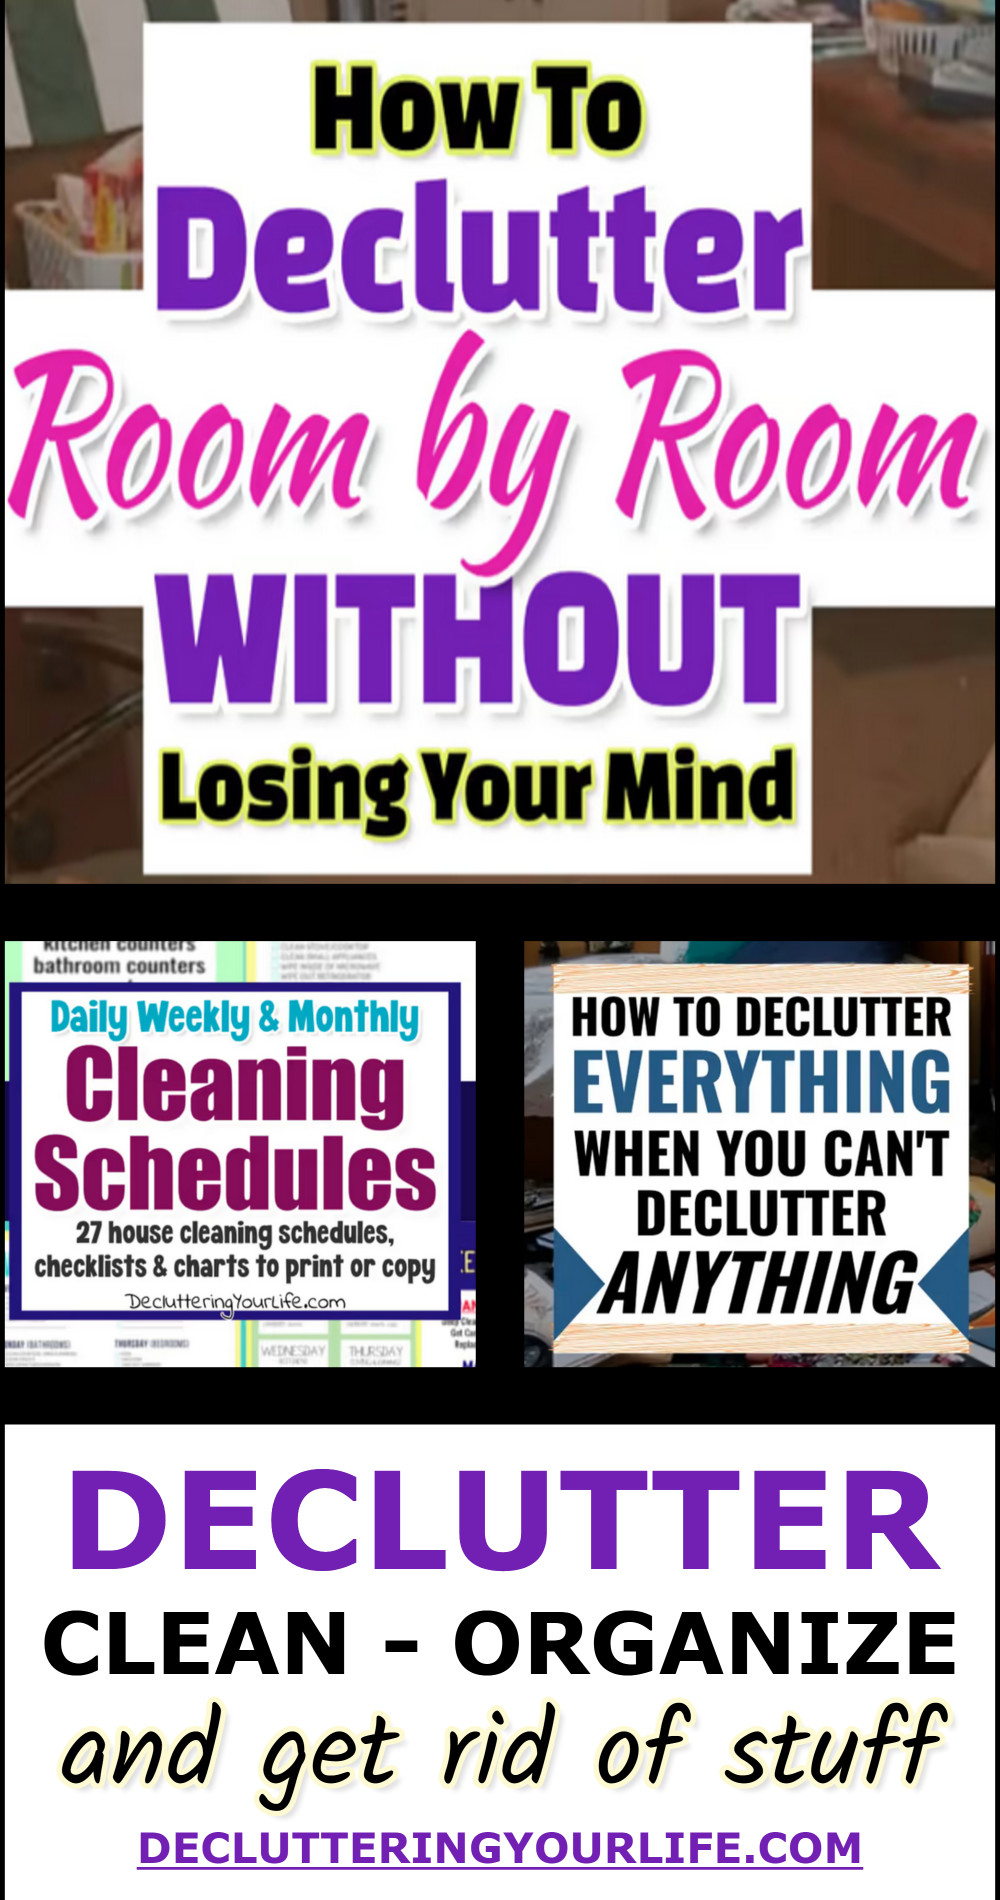 Declutter Clean Organize related